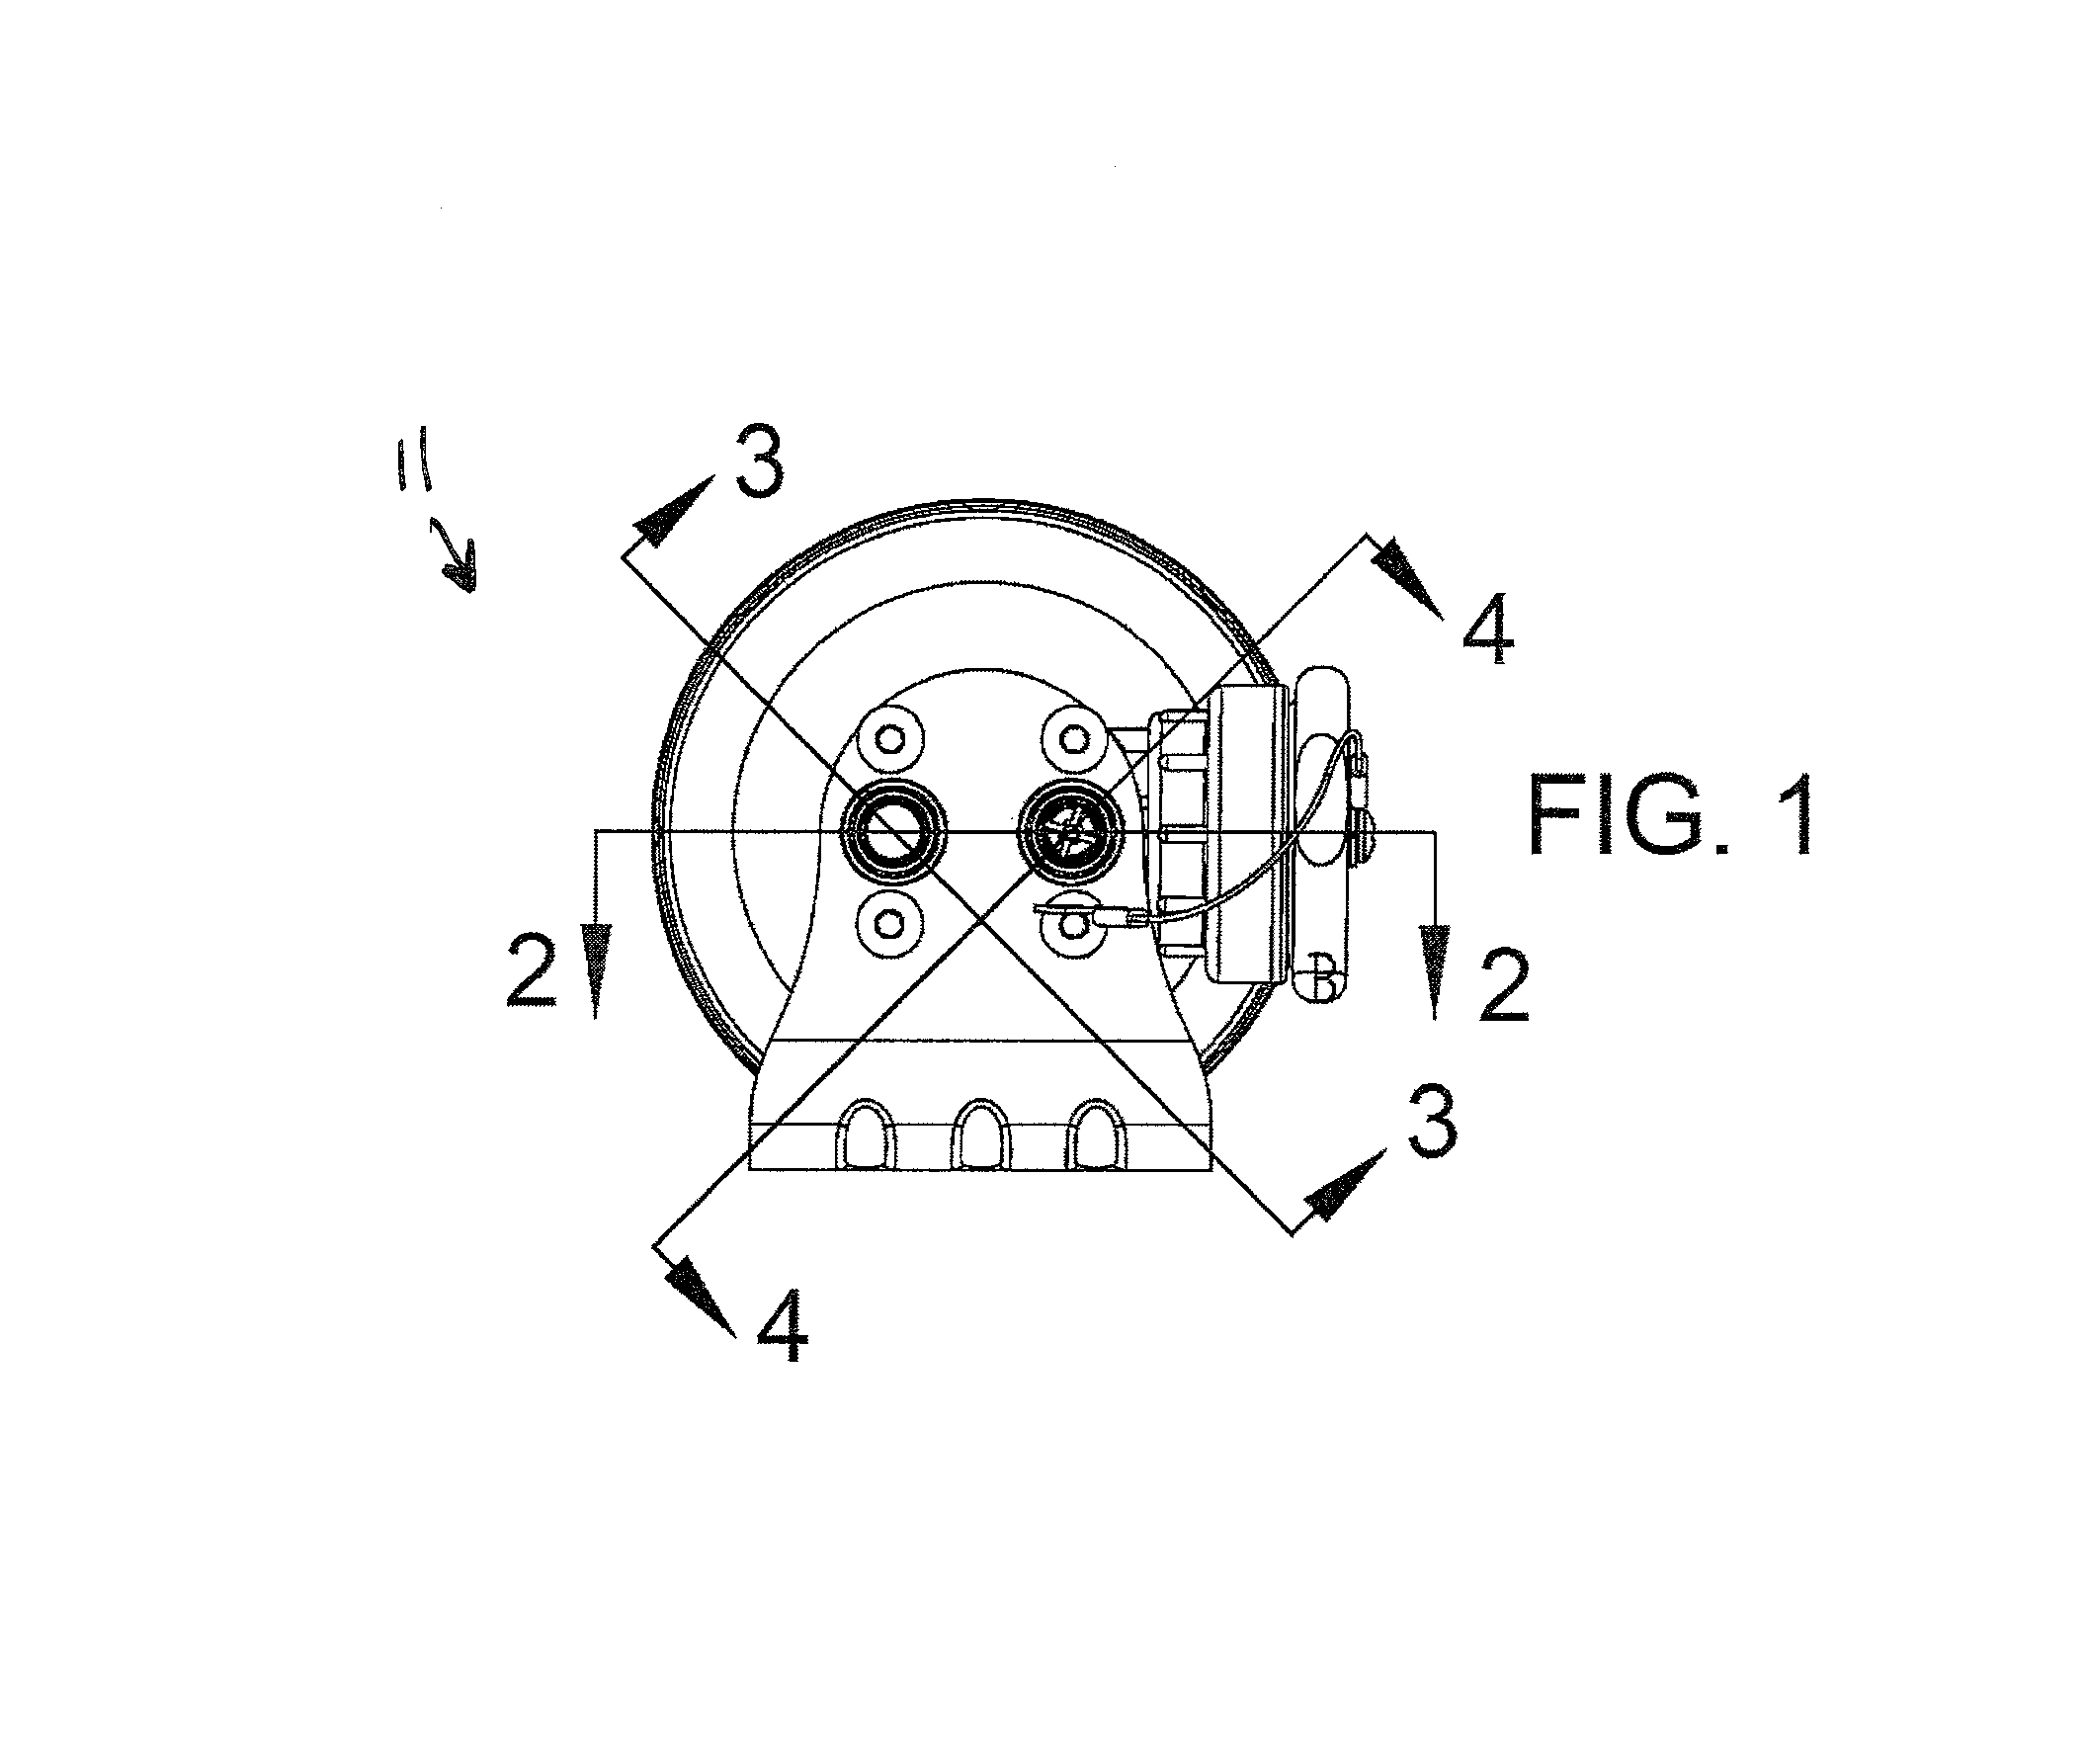 Apparatus for filtering and/or conditioning and/or purifying a fluid such as water, and interface thereof for providing water boiler expansion pressure relief